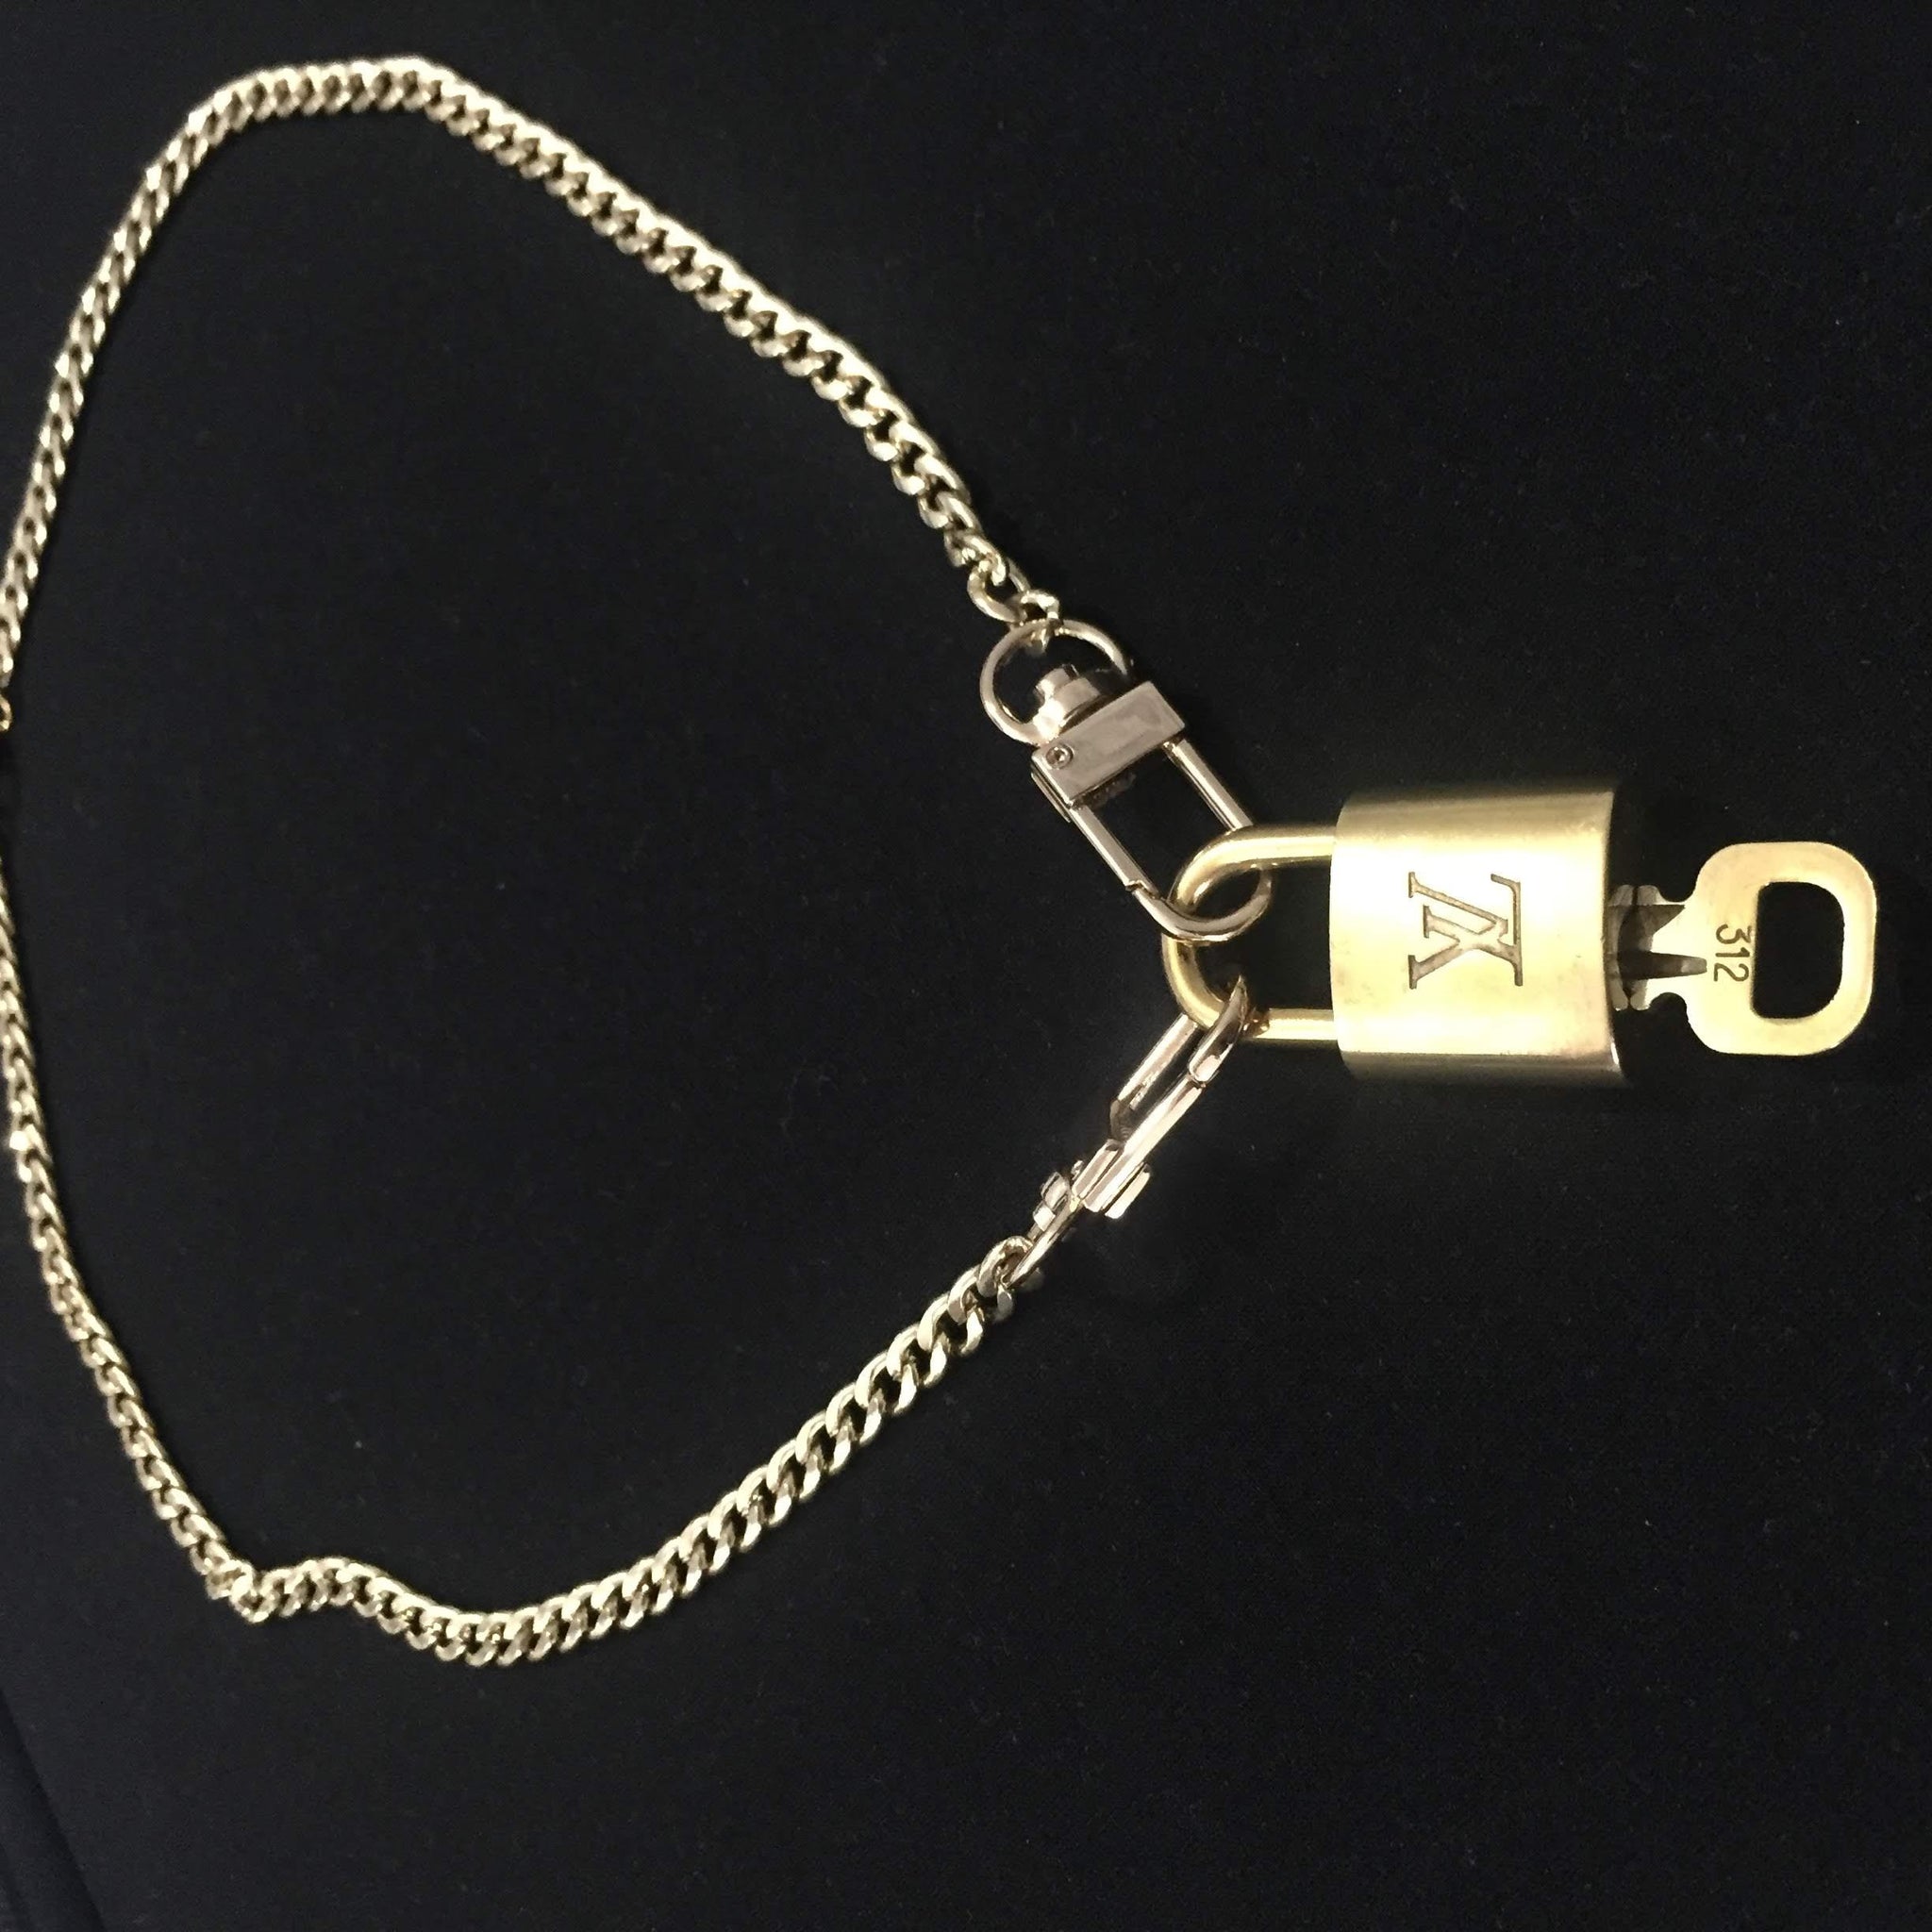 Authentic Louis Vuitton Gold Brass Lock and Key Set 312 -  UK